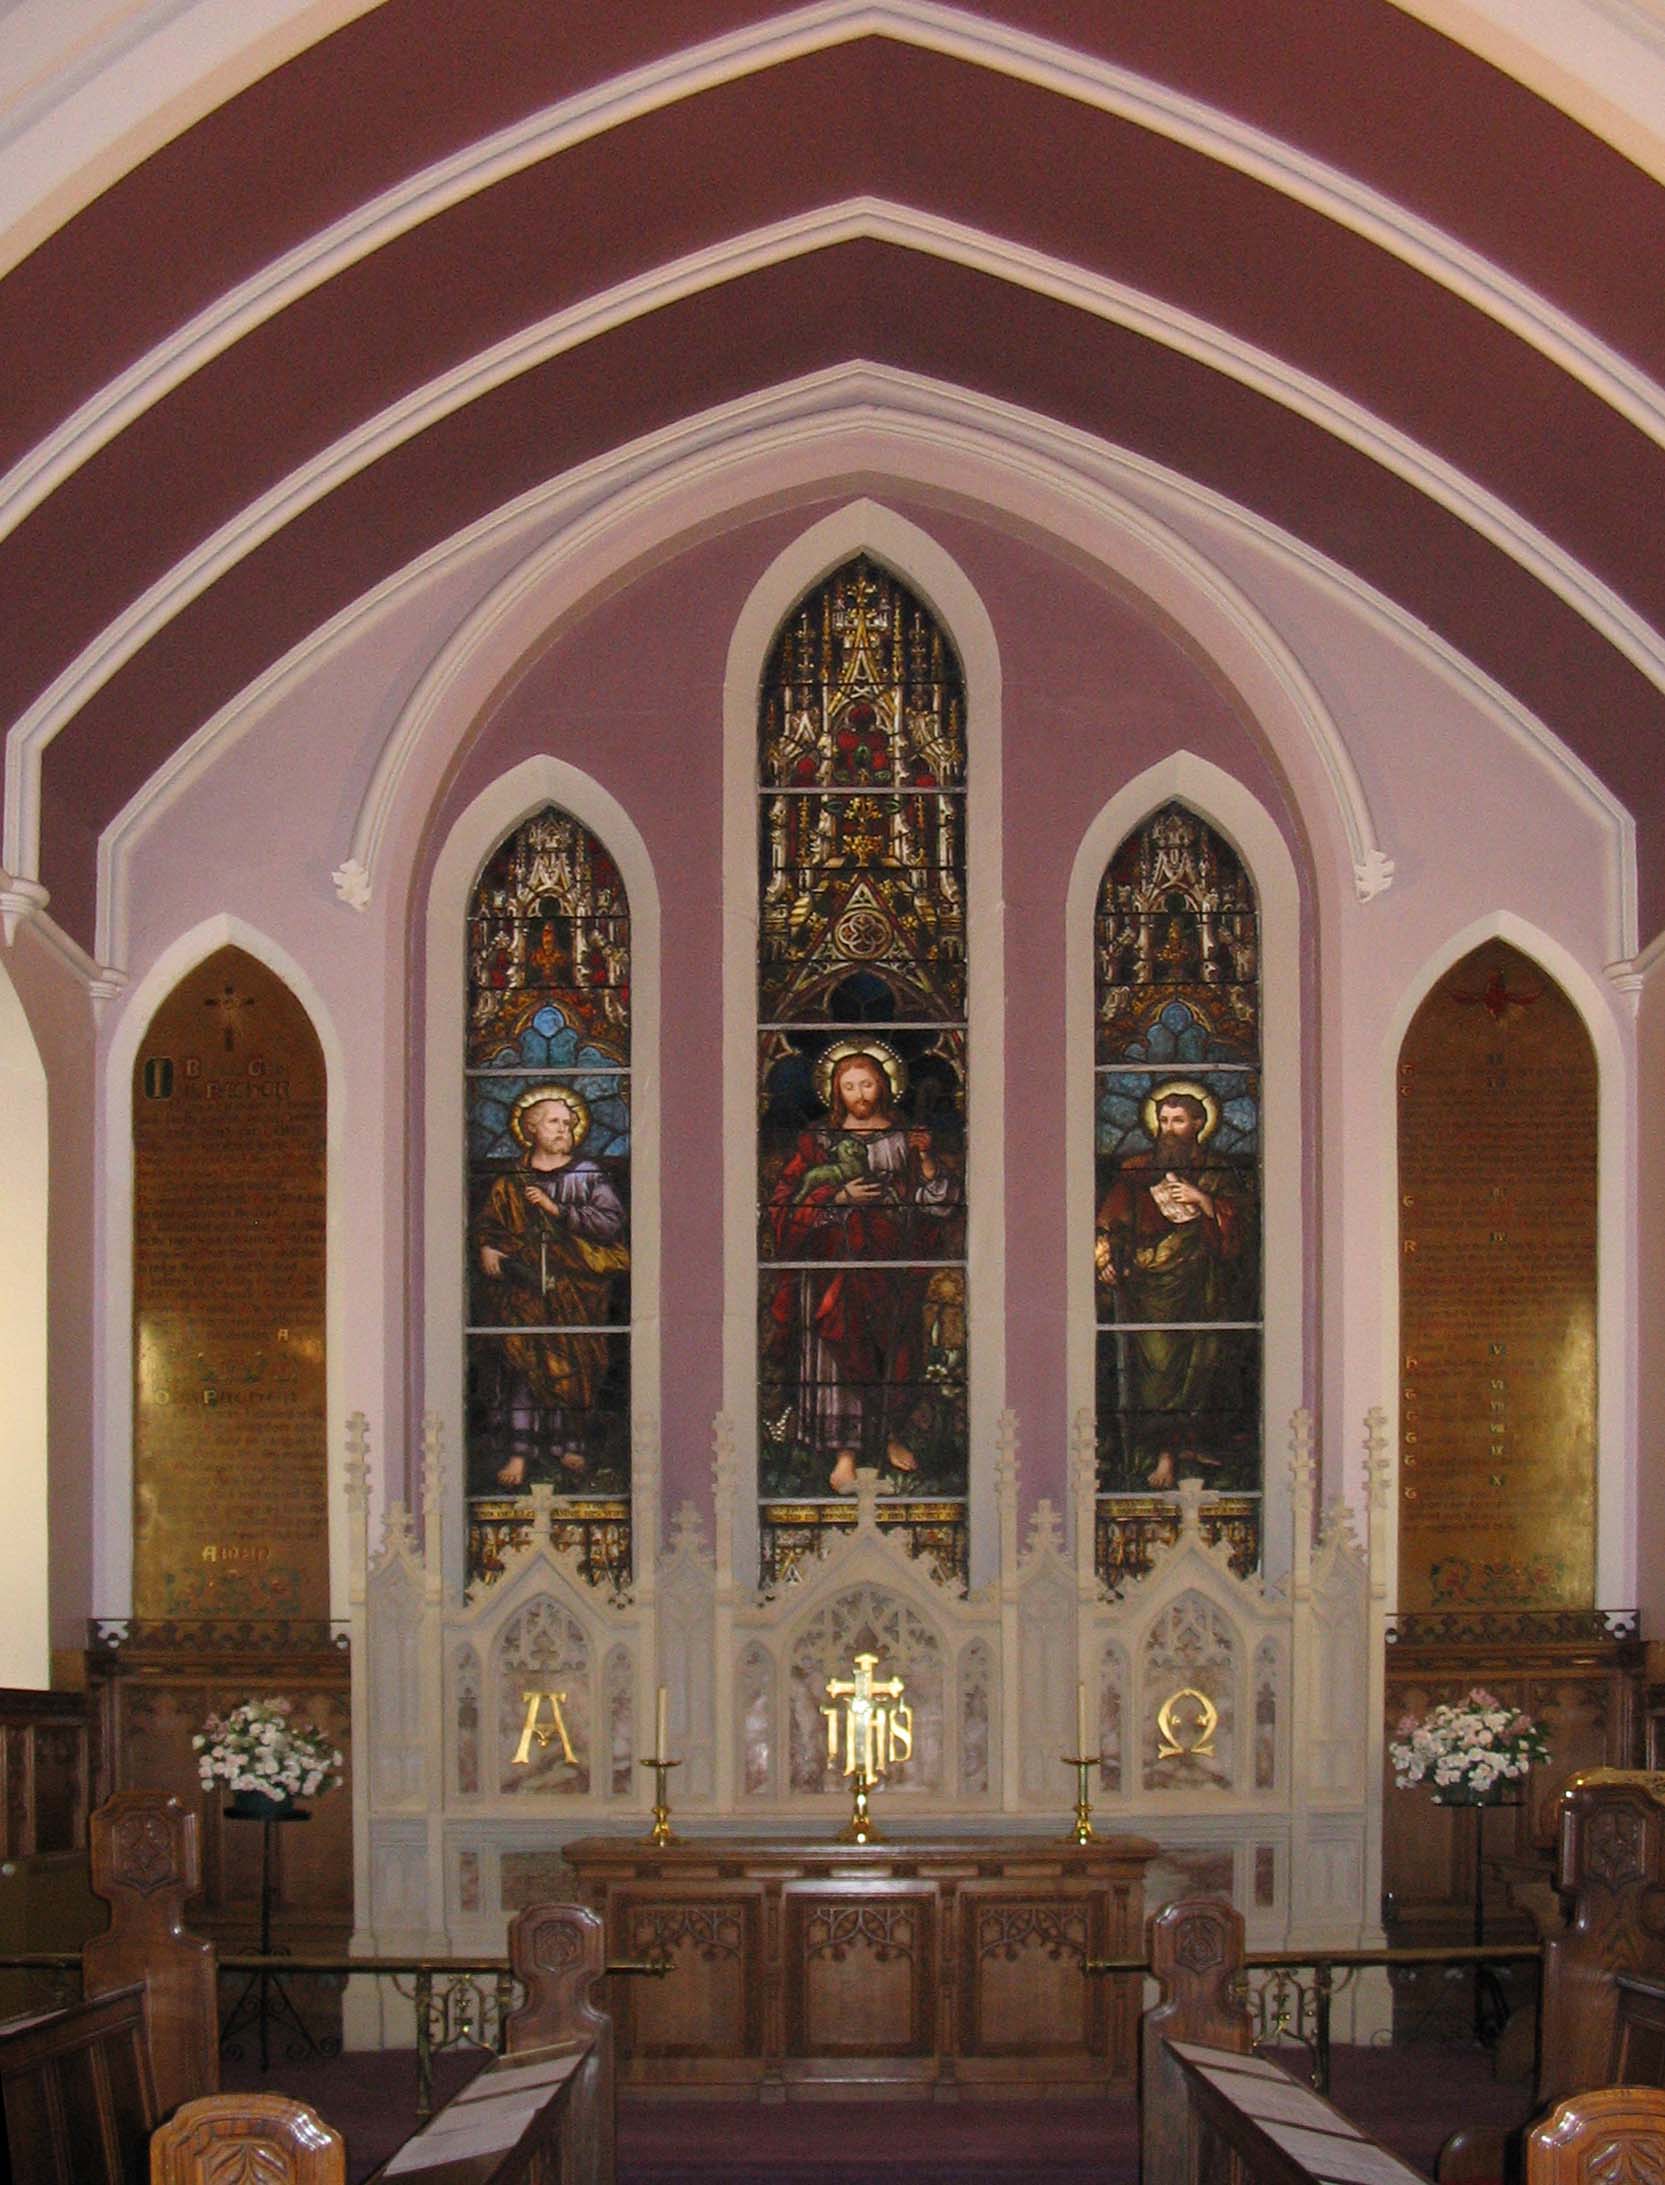 The interior of Christ Church, Croft, showing the windows